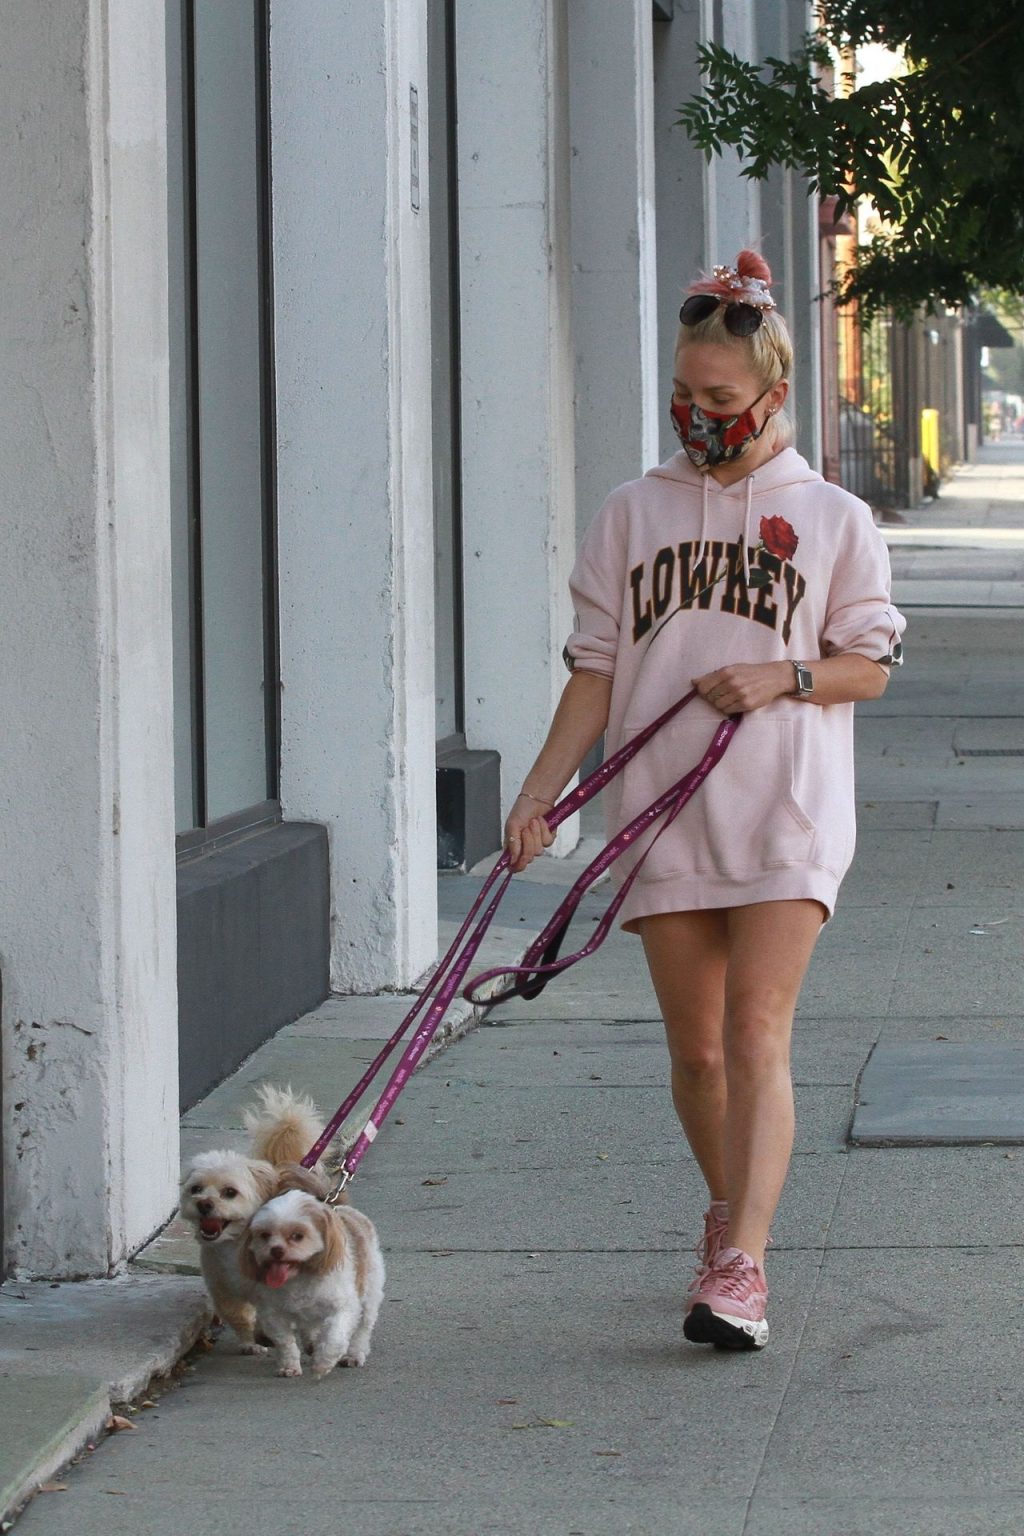 Sharna Burgess Brings Her Dogs to the DWTS Dance Studio (38 Photos)